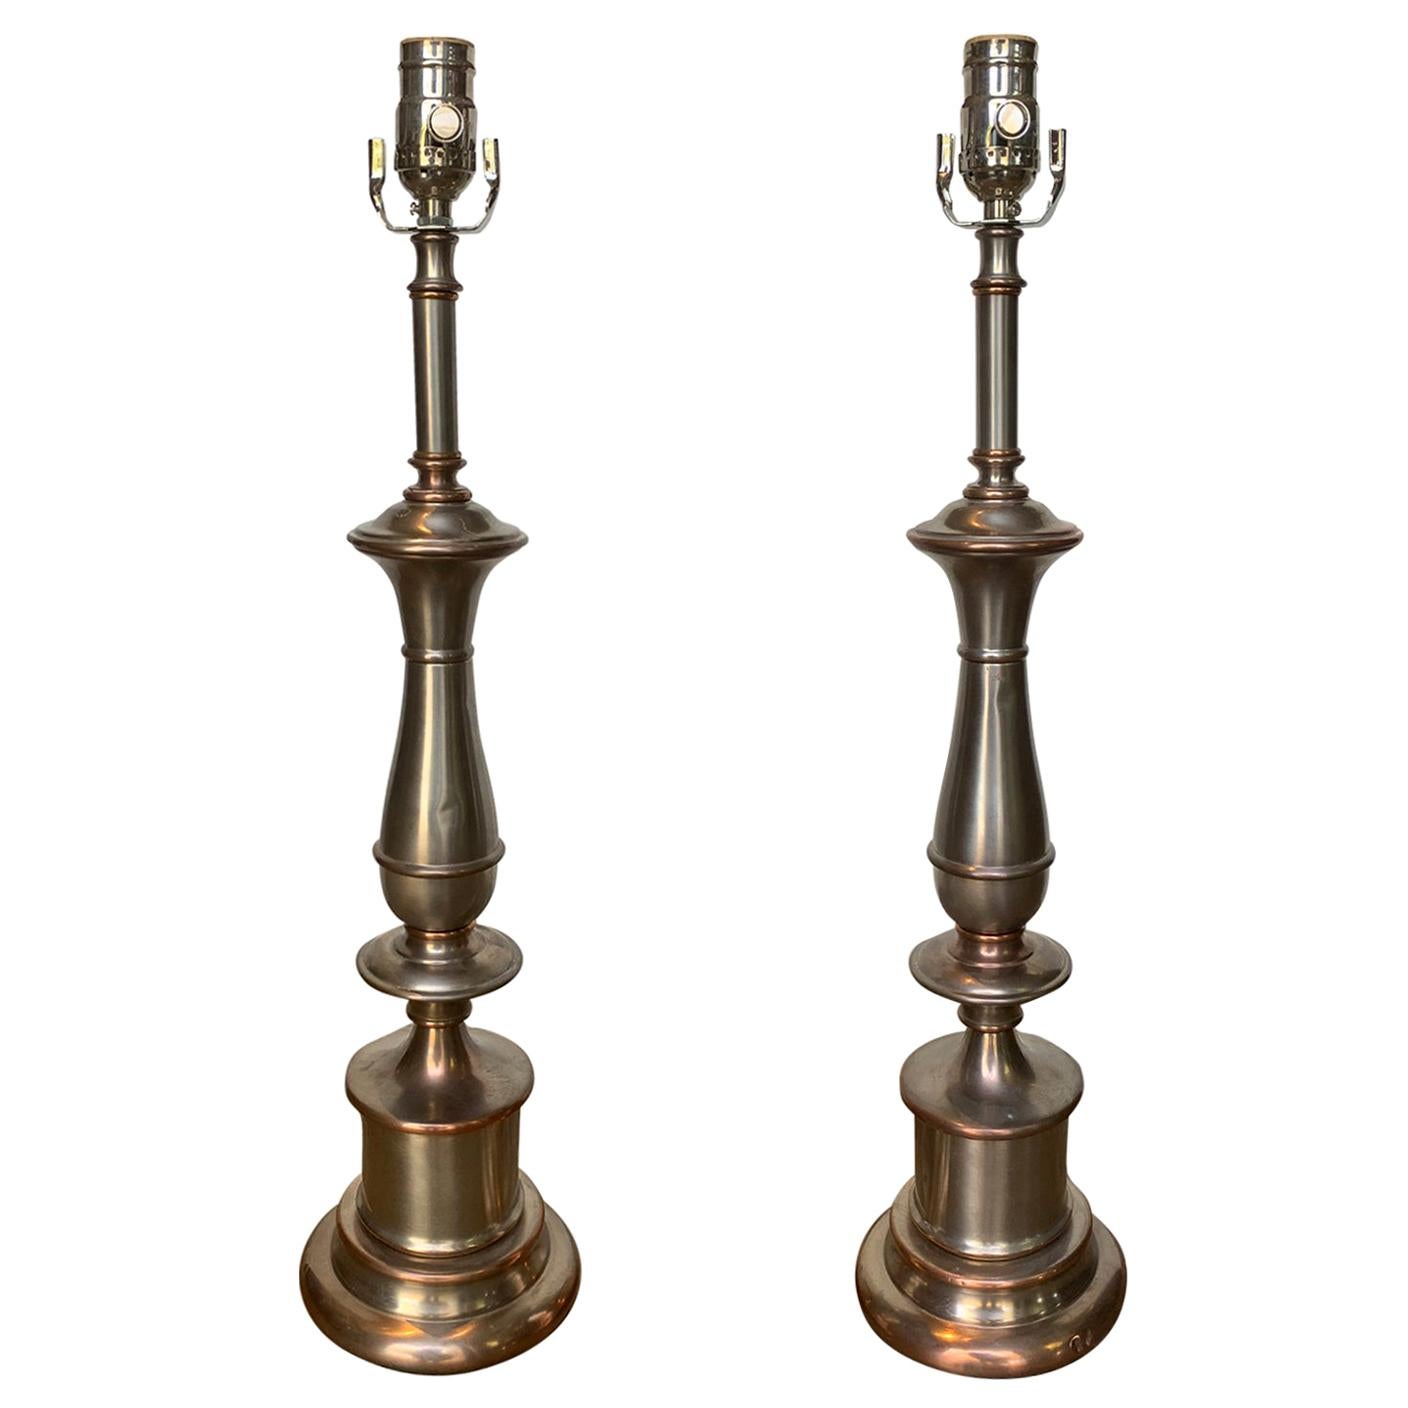 Pair of Mid-20th Century Steel and Brass Lamps